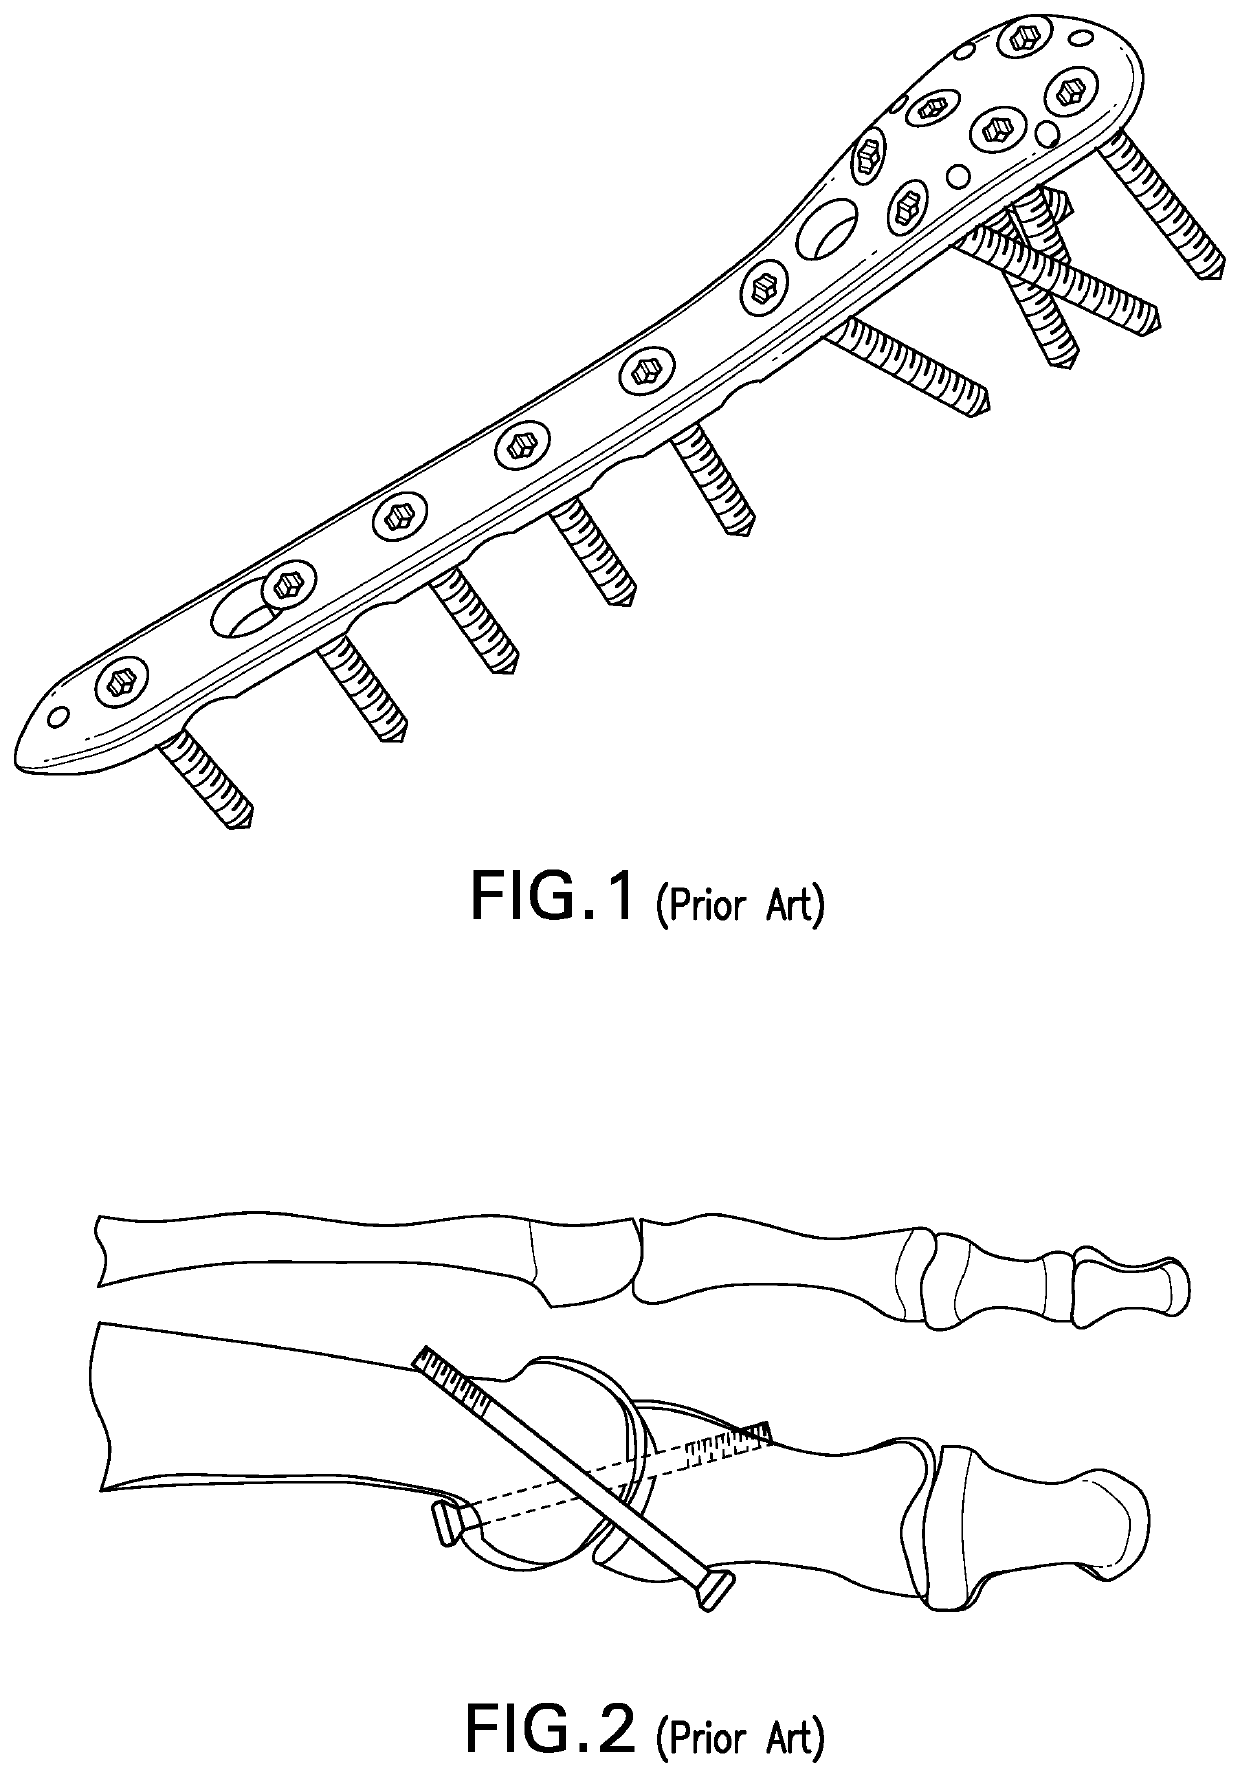 Orthopedic plate with modular peg and compression screw